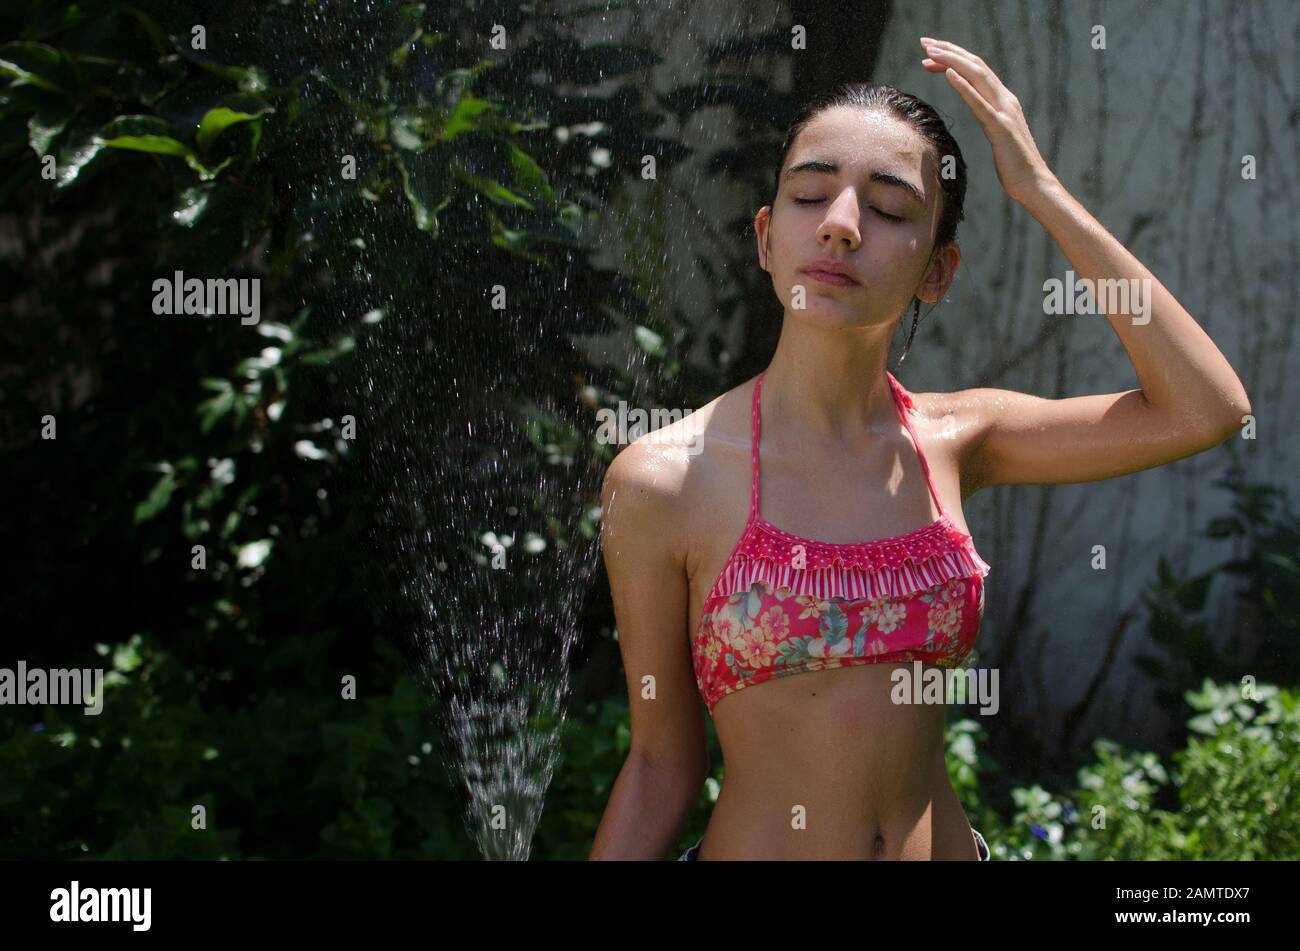 Teenage girl standing in a garden cooling off with a water hose, Argentina Stock Photo